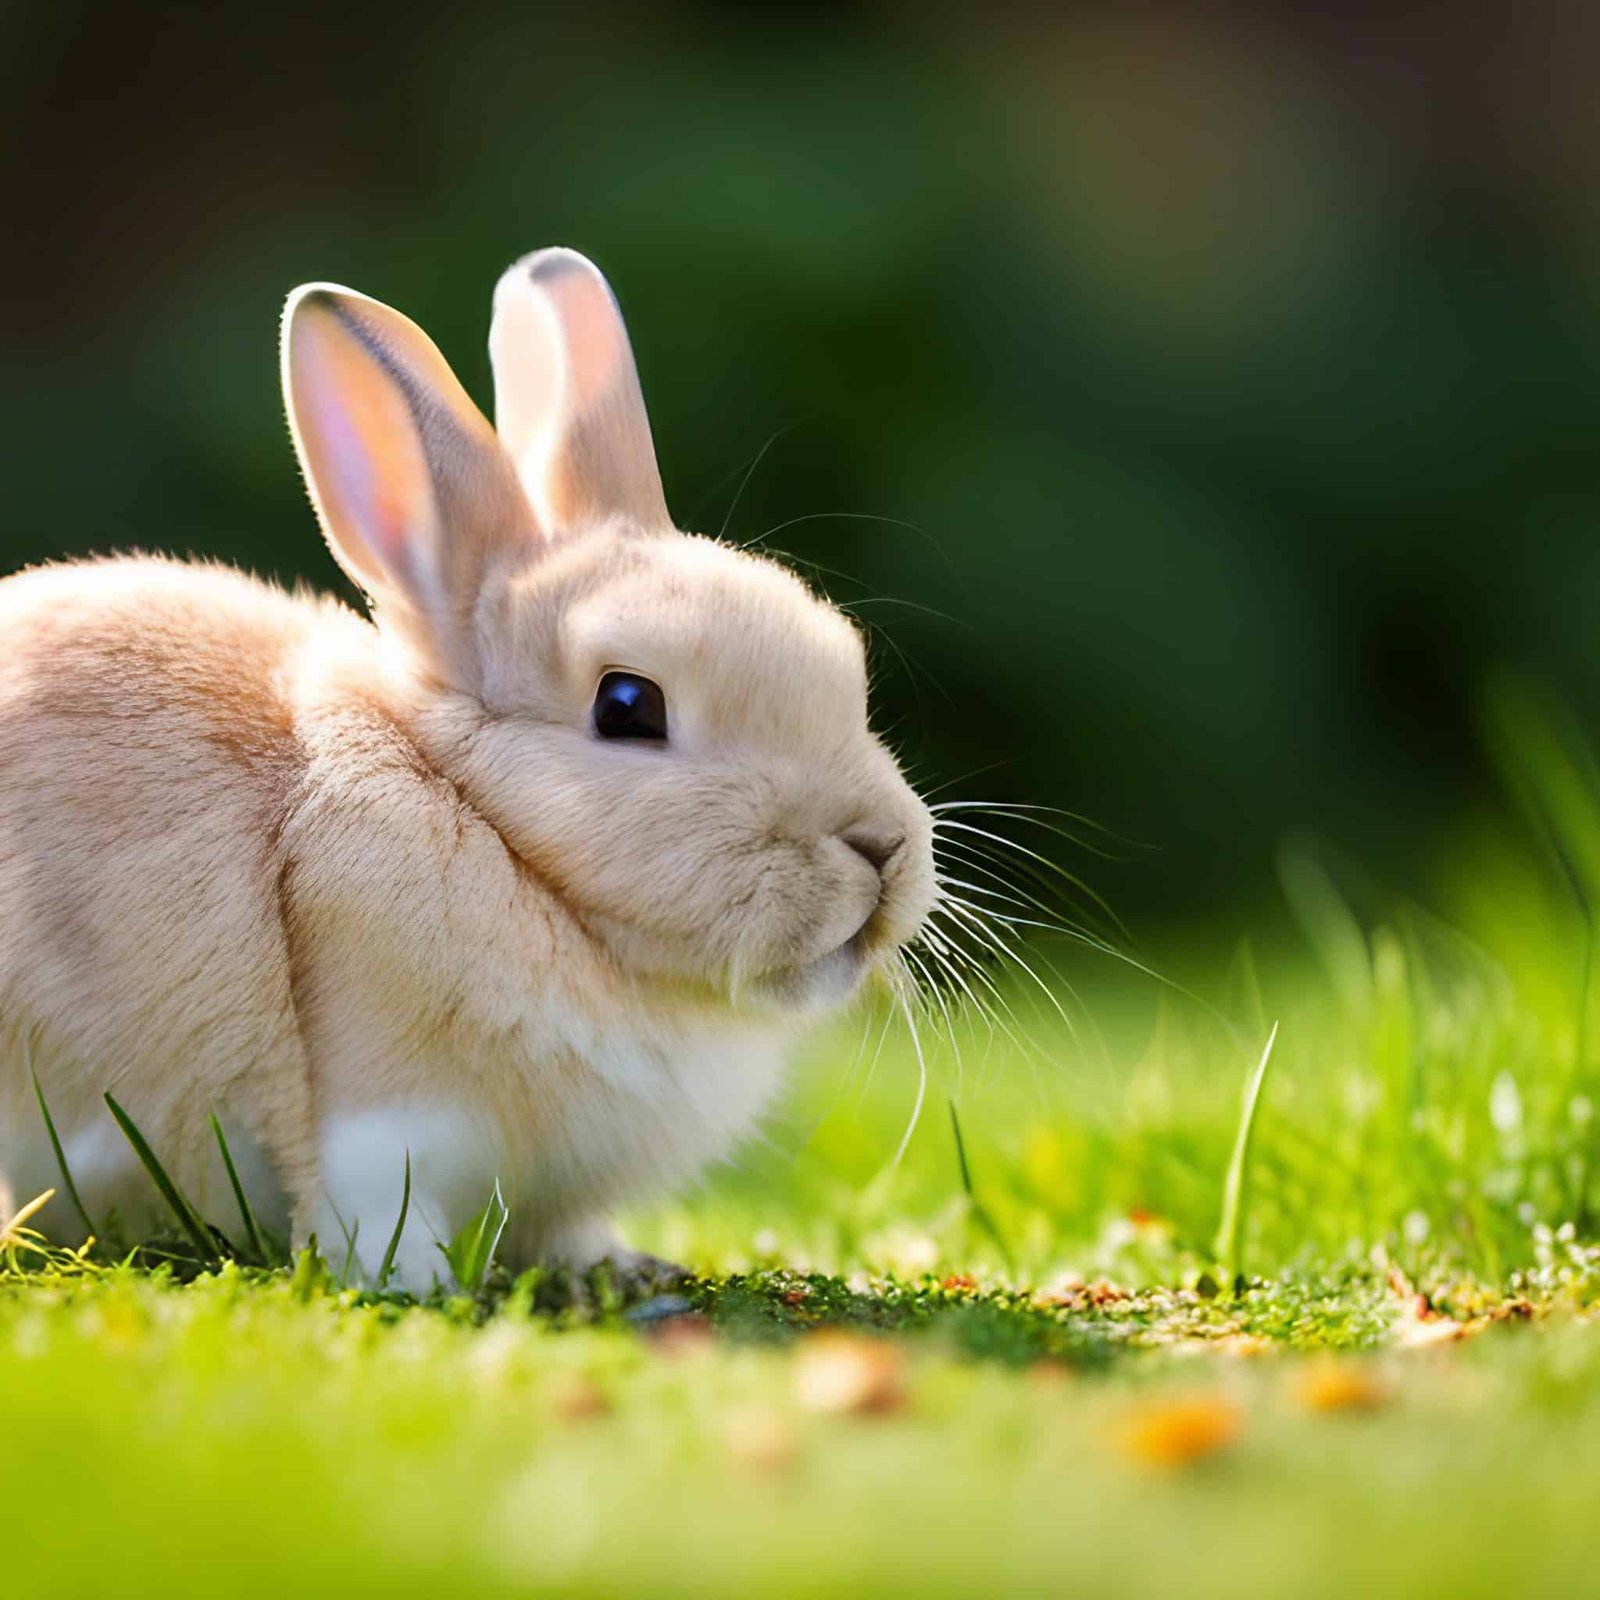 Can Rabbits Die From Loud Noises